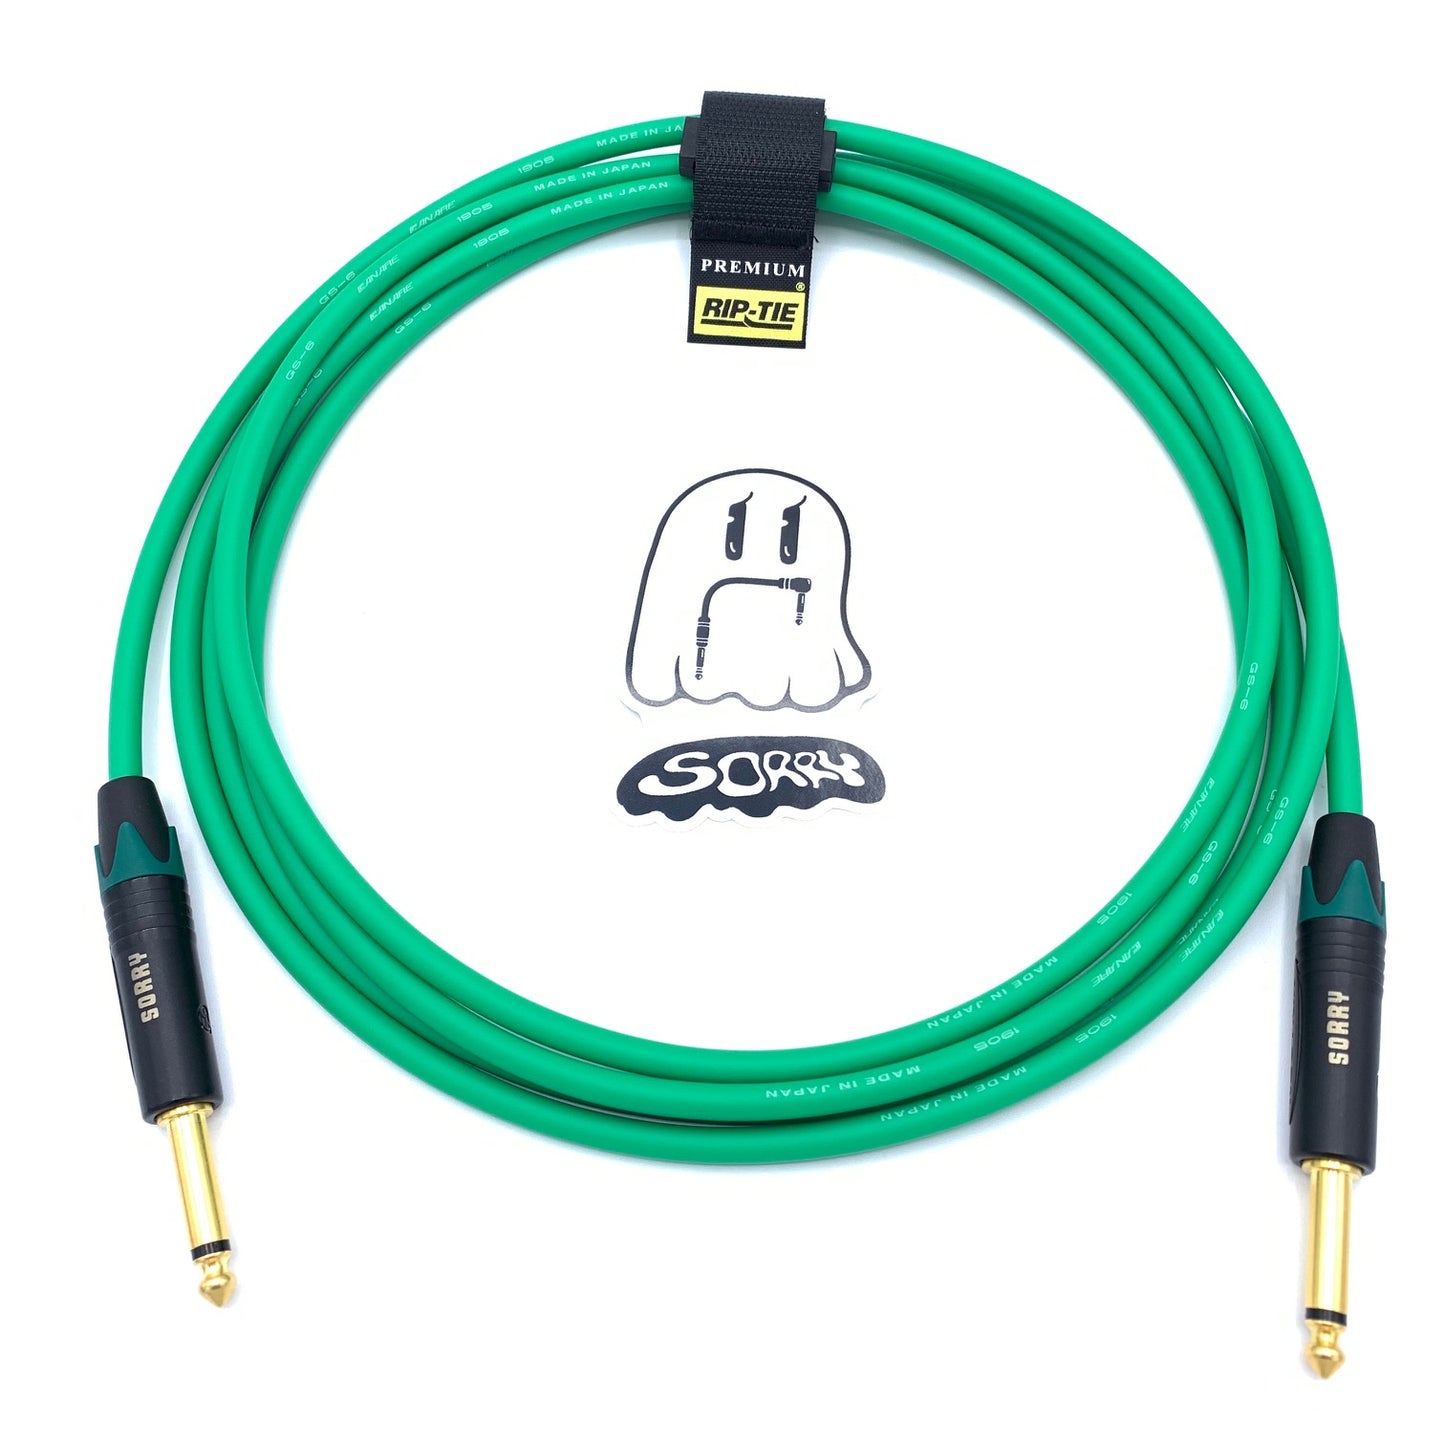 SORRY Straight to Straight Guitar / Instrument Cable - Standard Green